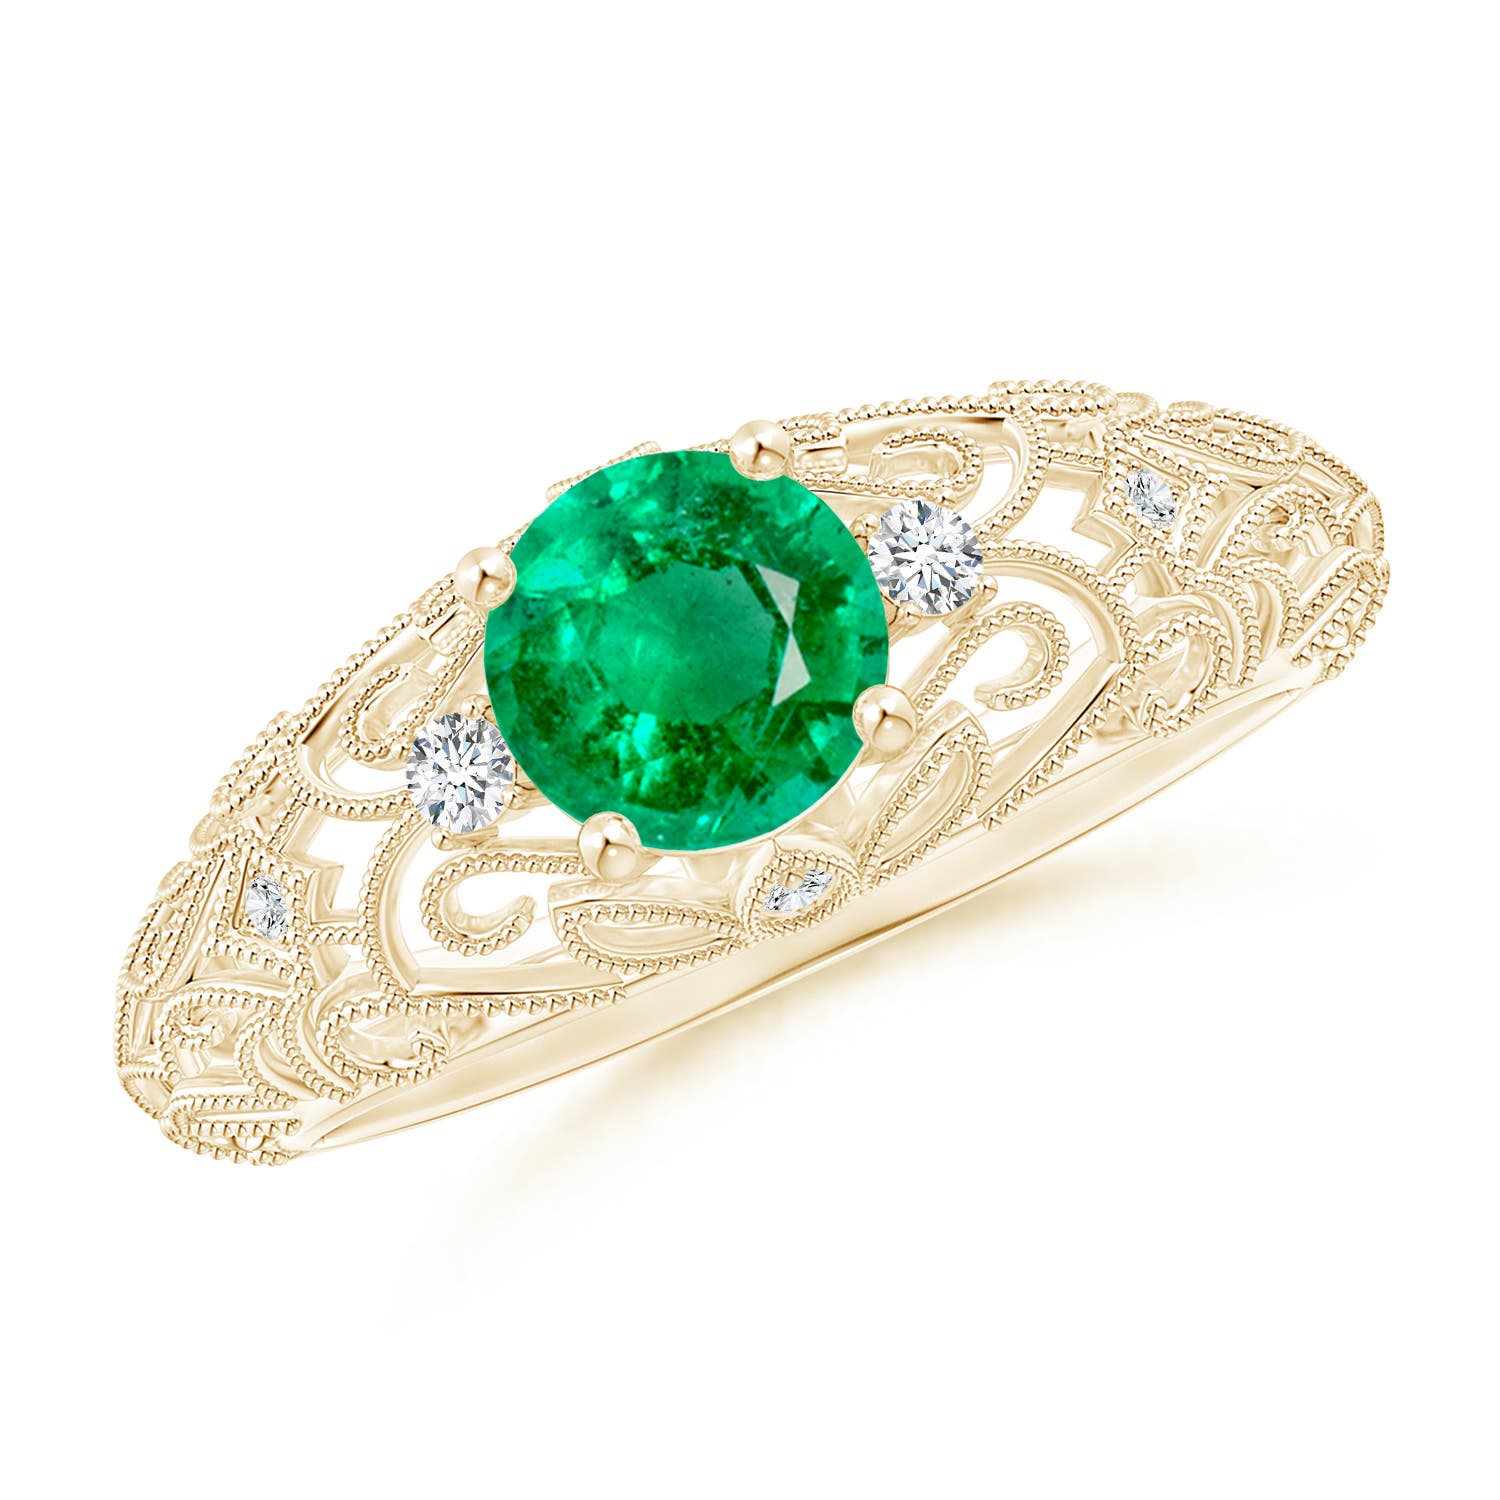 AAA - Emerald / 0.82 CT / 14 KT Yellow Gold